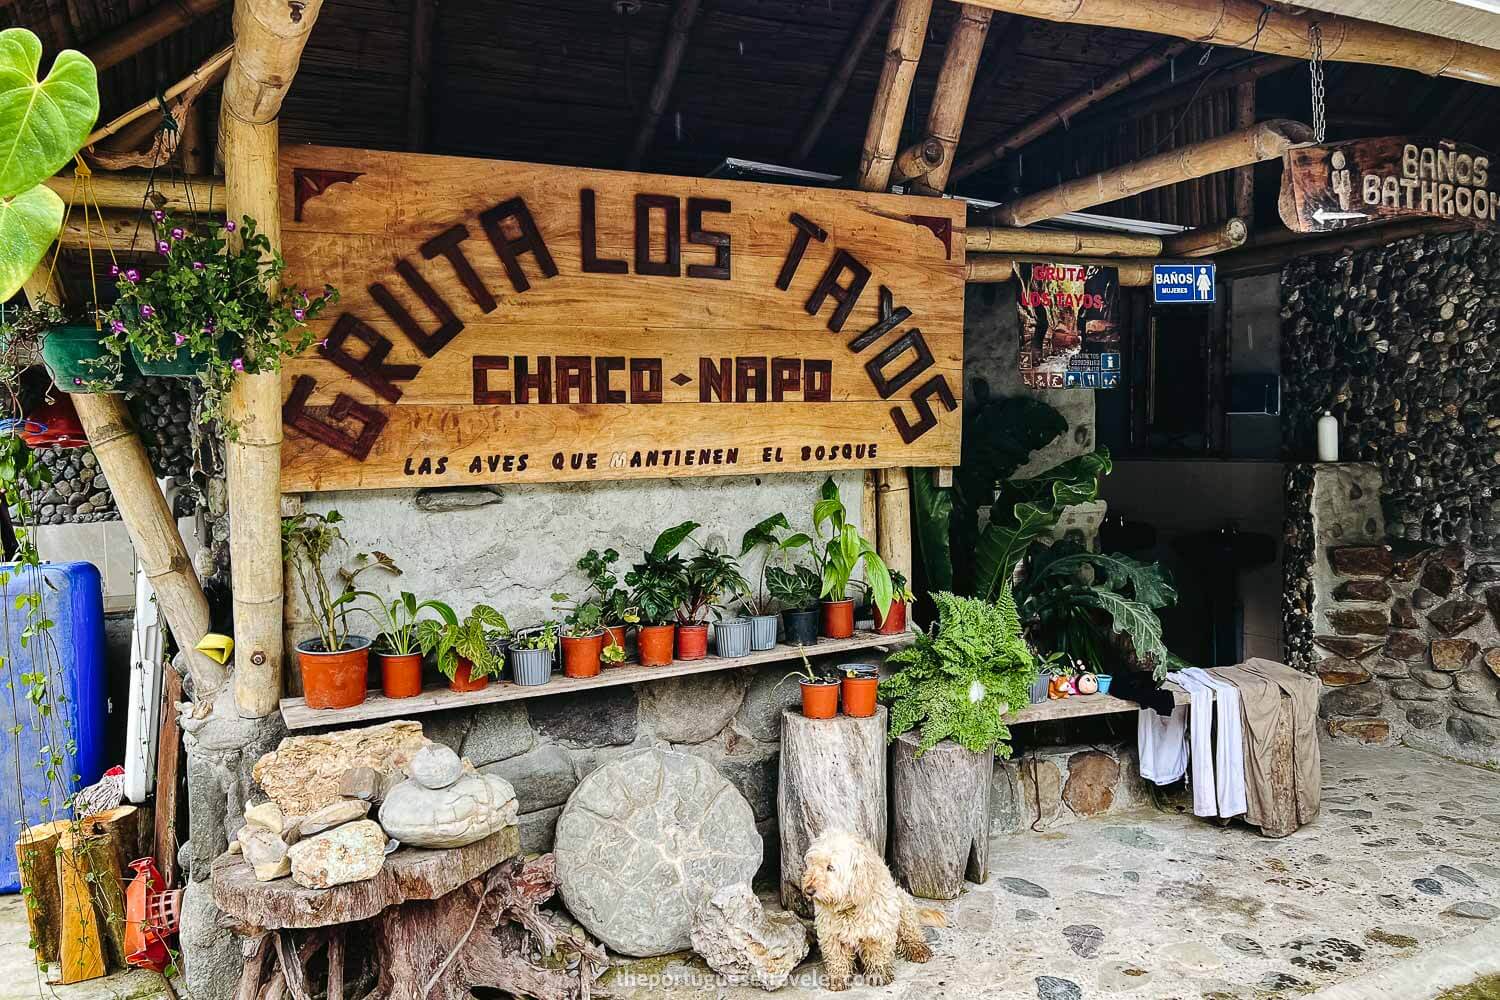 The reception of Gruta de Los Tayos by the road where the adventure starts